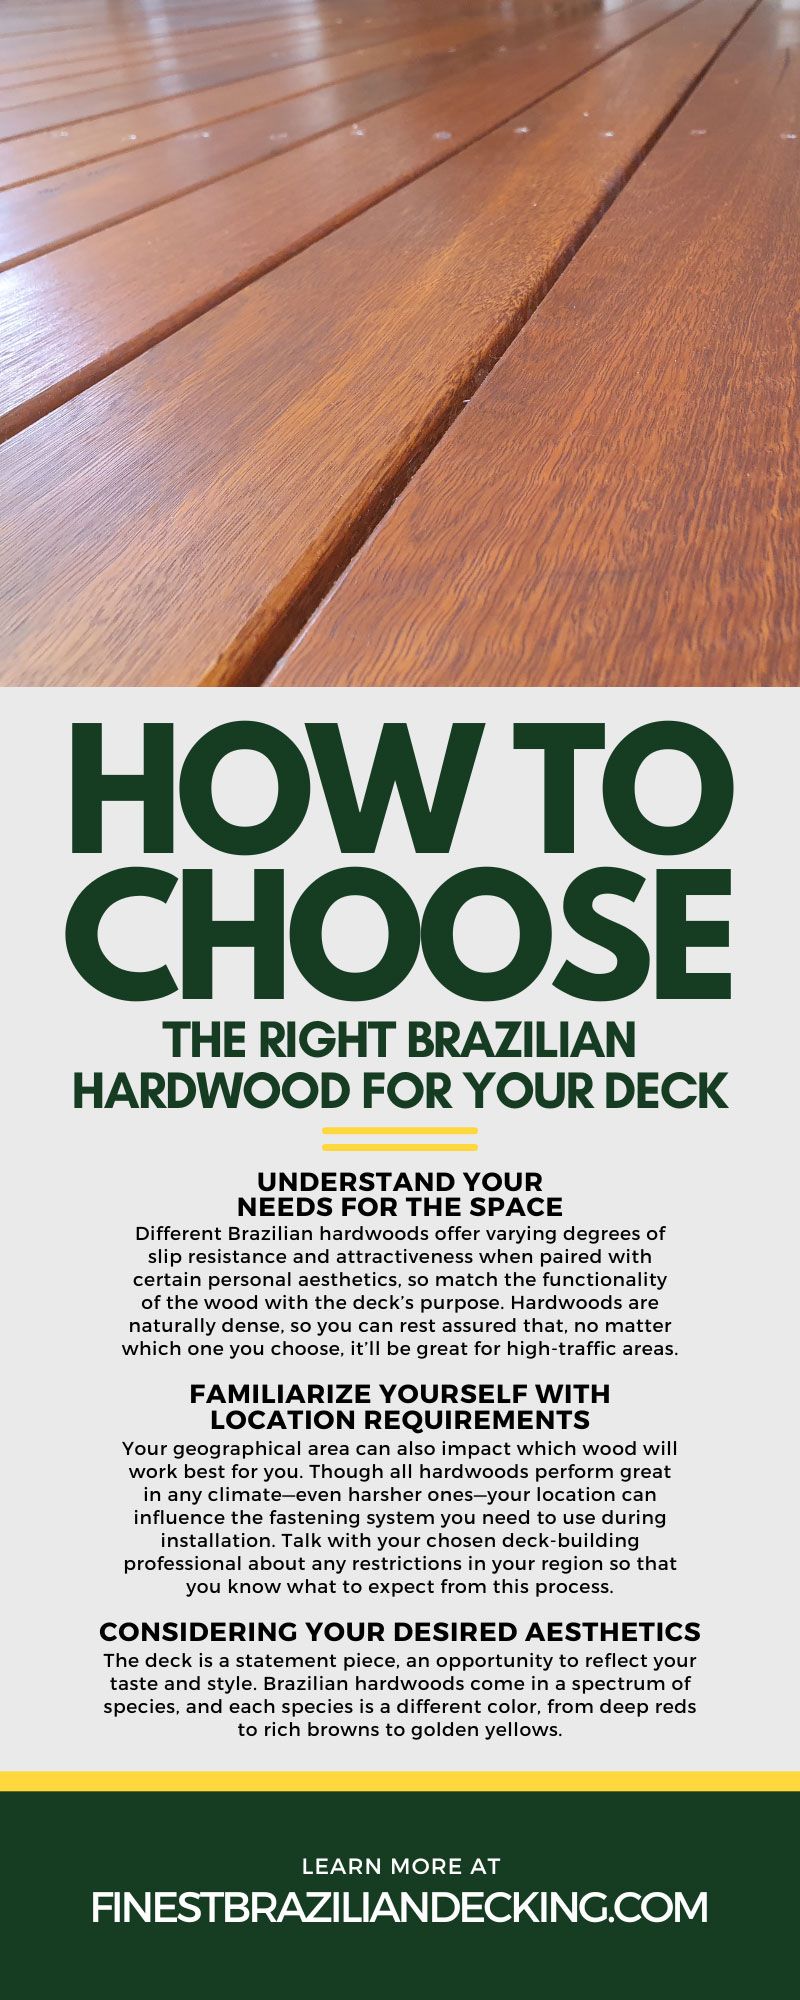 How To Choose the Right Brazilian Hardwood for Your Deck